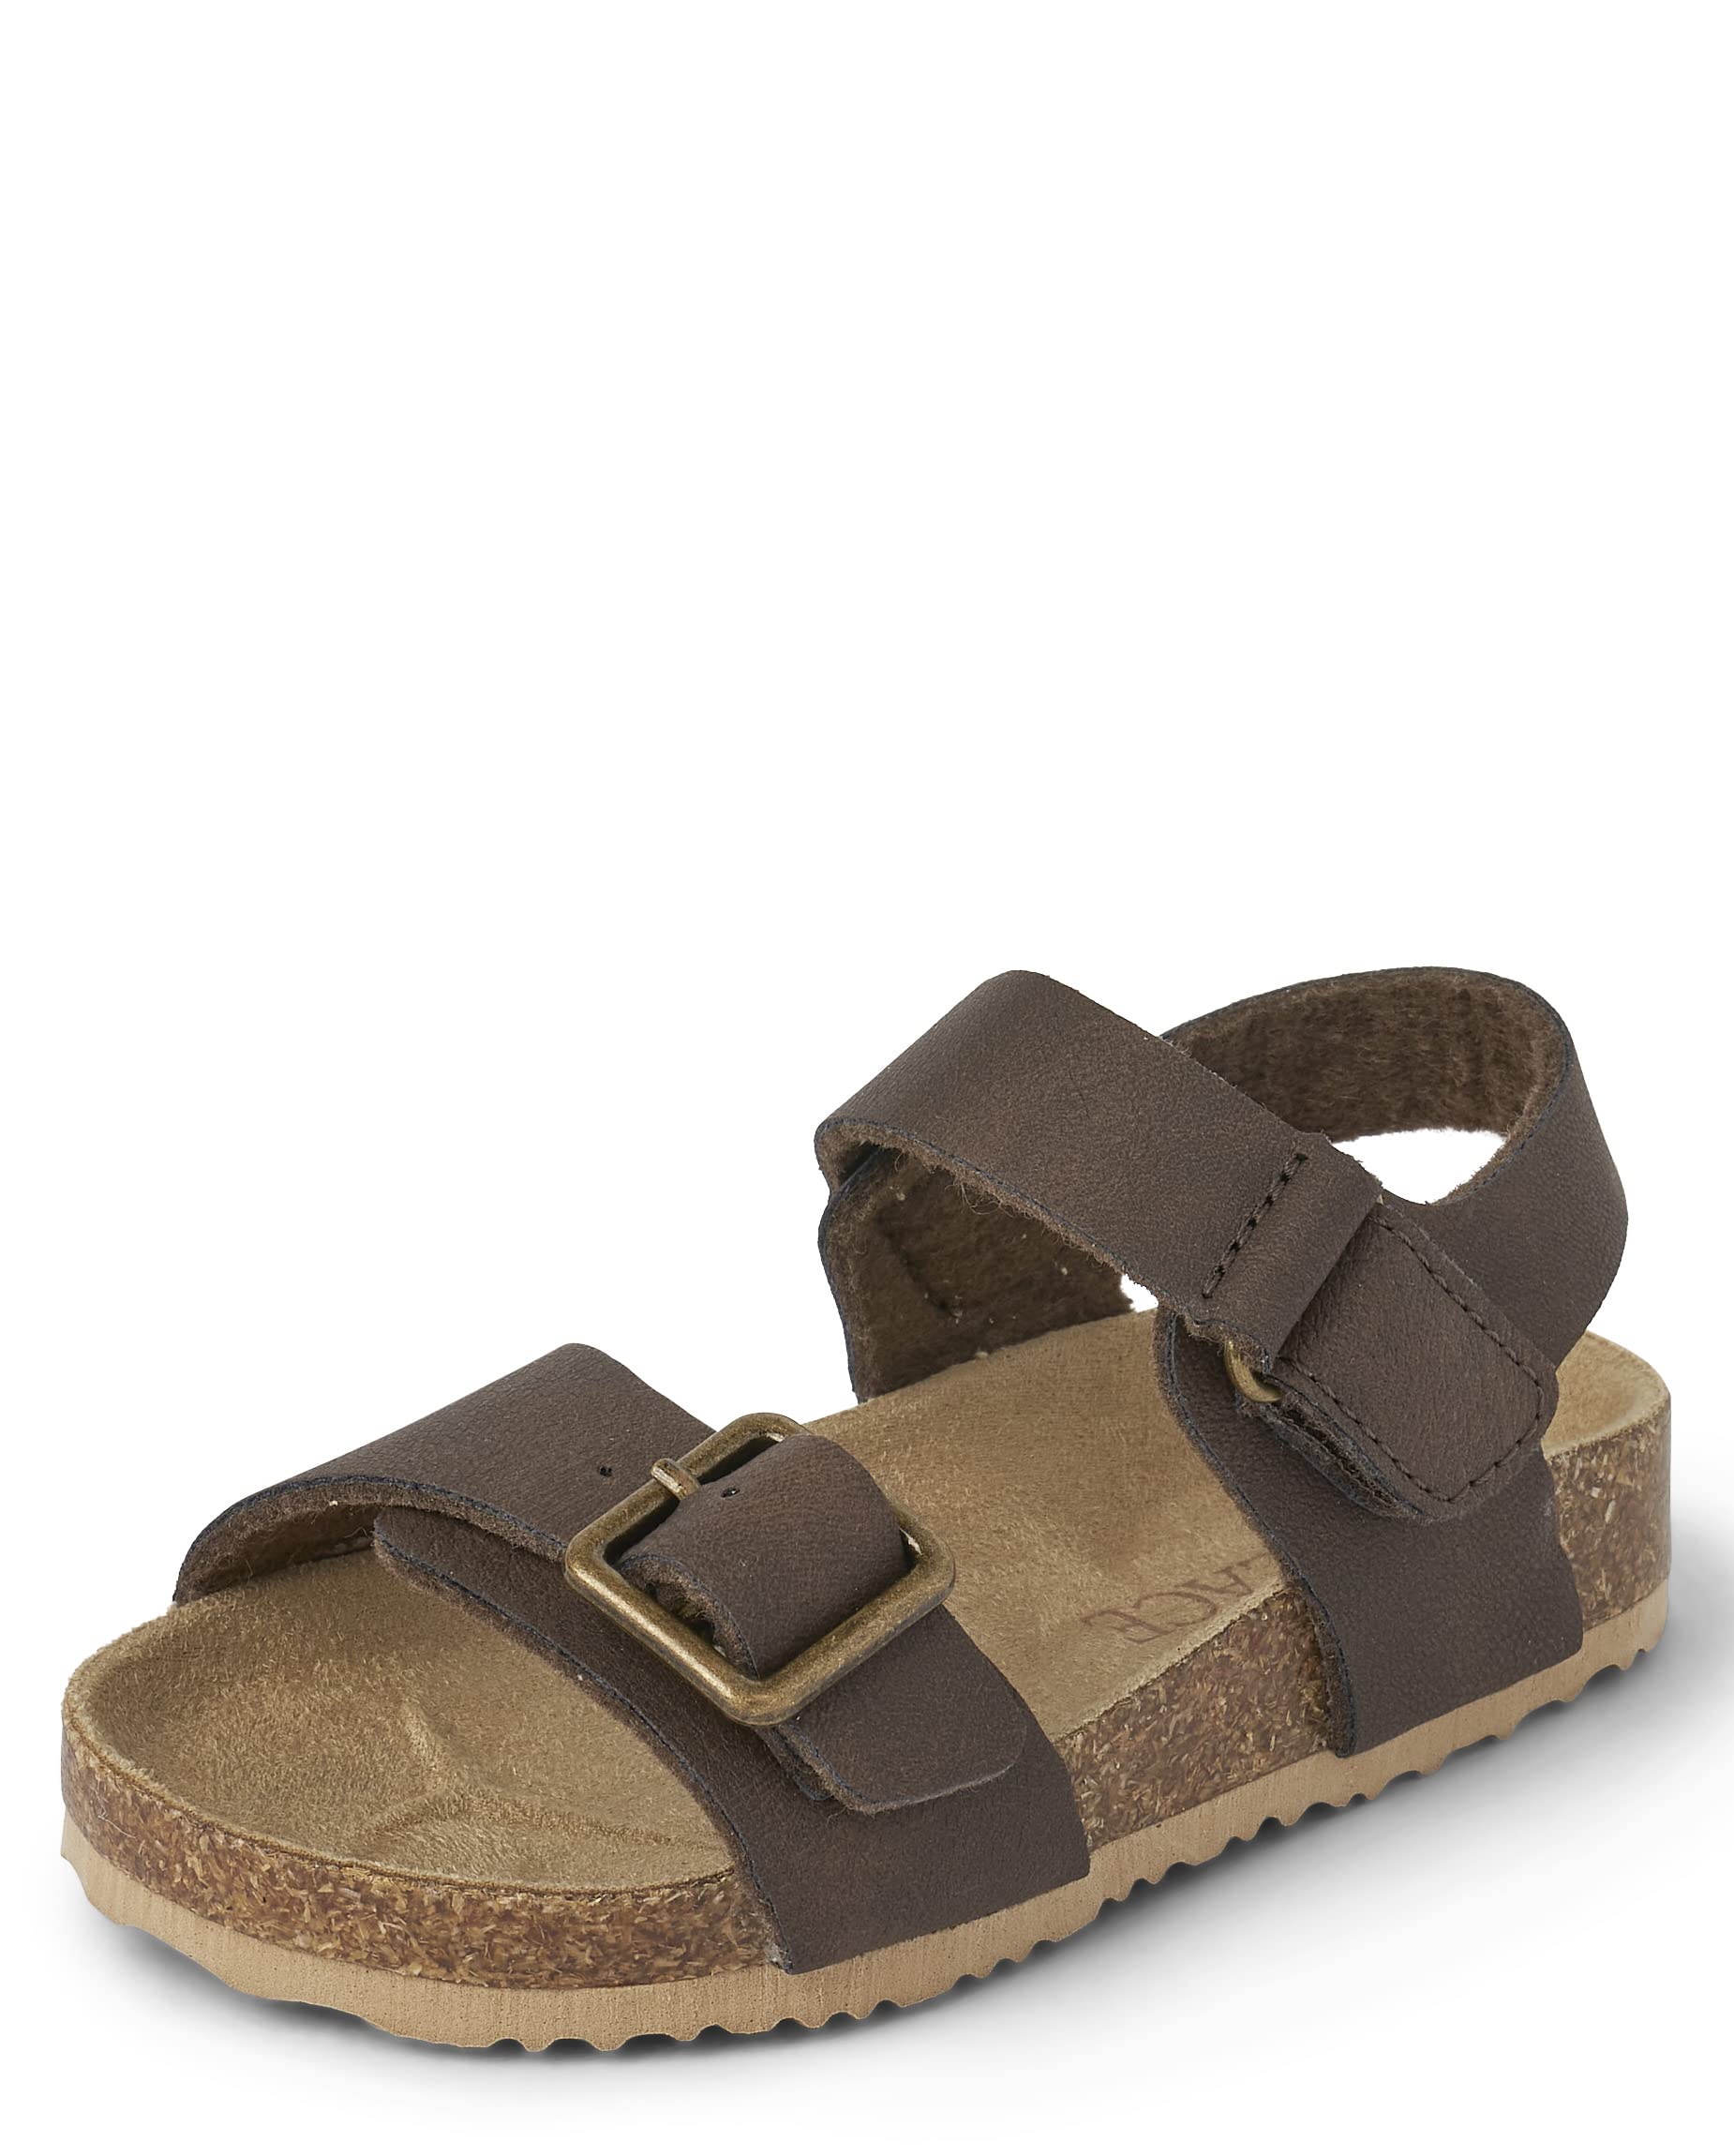 The Children's Place Toddler Boys Buckle Sandals Slide, Browns, 7